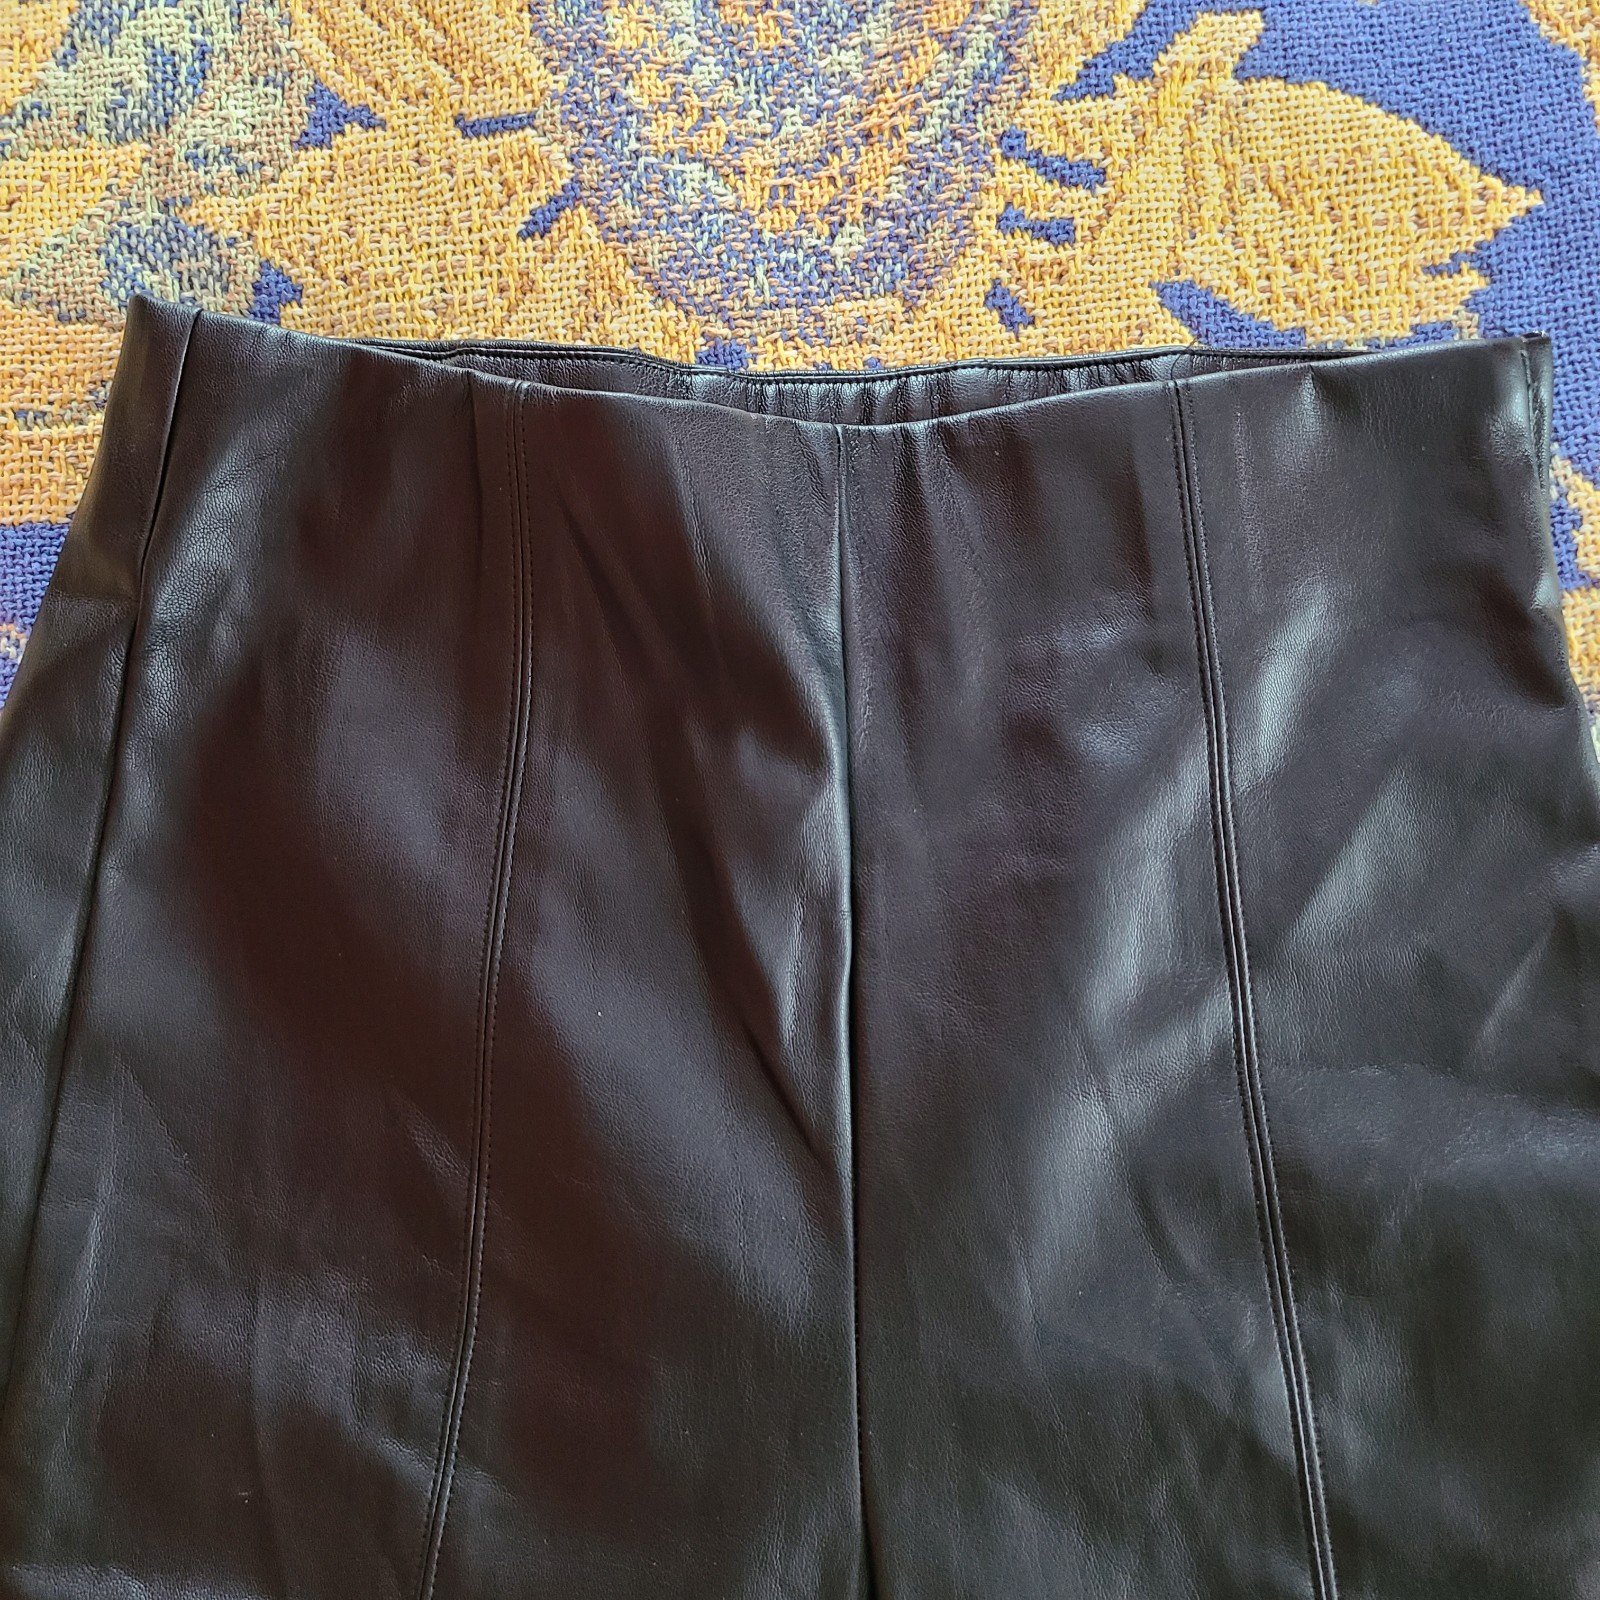 Promotions  Lulus FAUX Leather Pants NWT oUGOjOOyW Discount